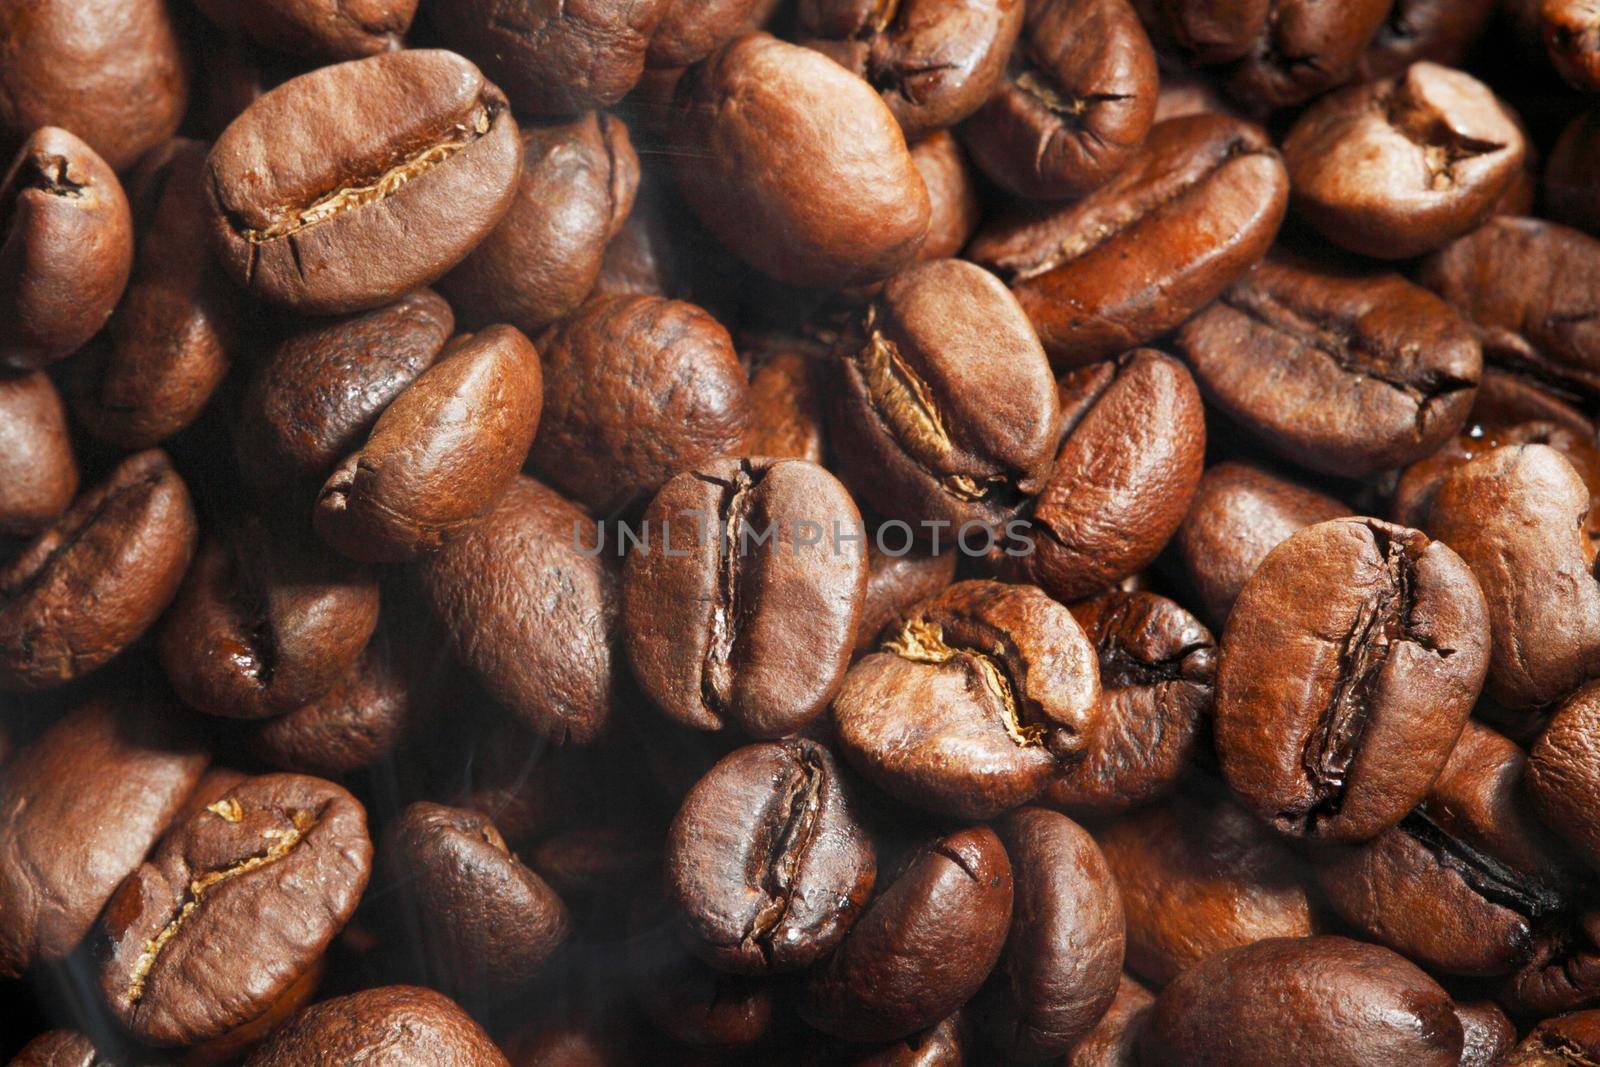 Hot roasted coffee beans clo se up detail background